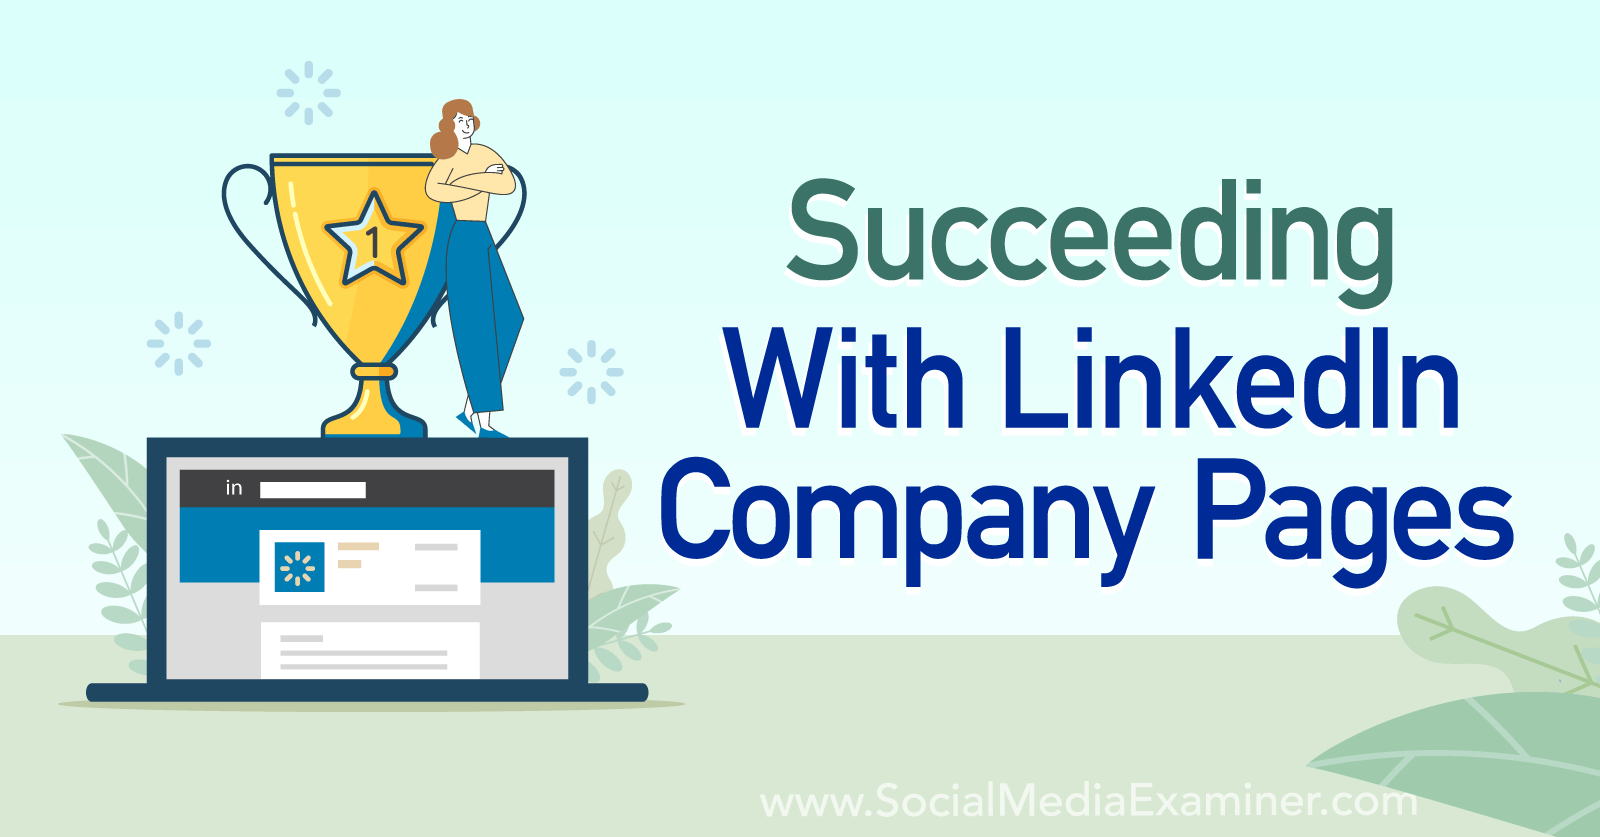 Succeeding With LinkedIn Company Pages by Social Media Examiner